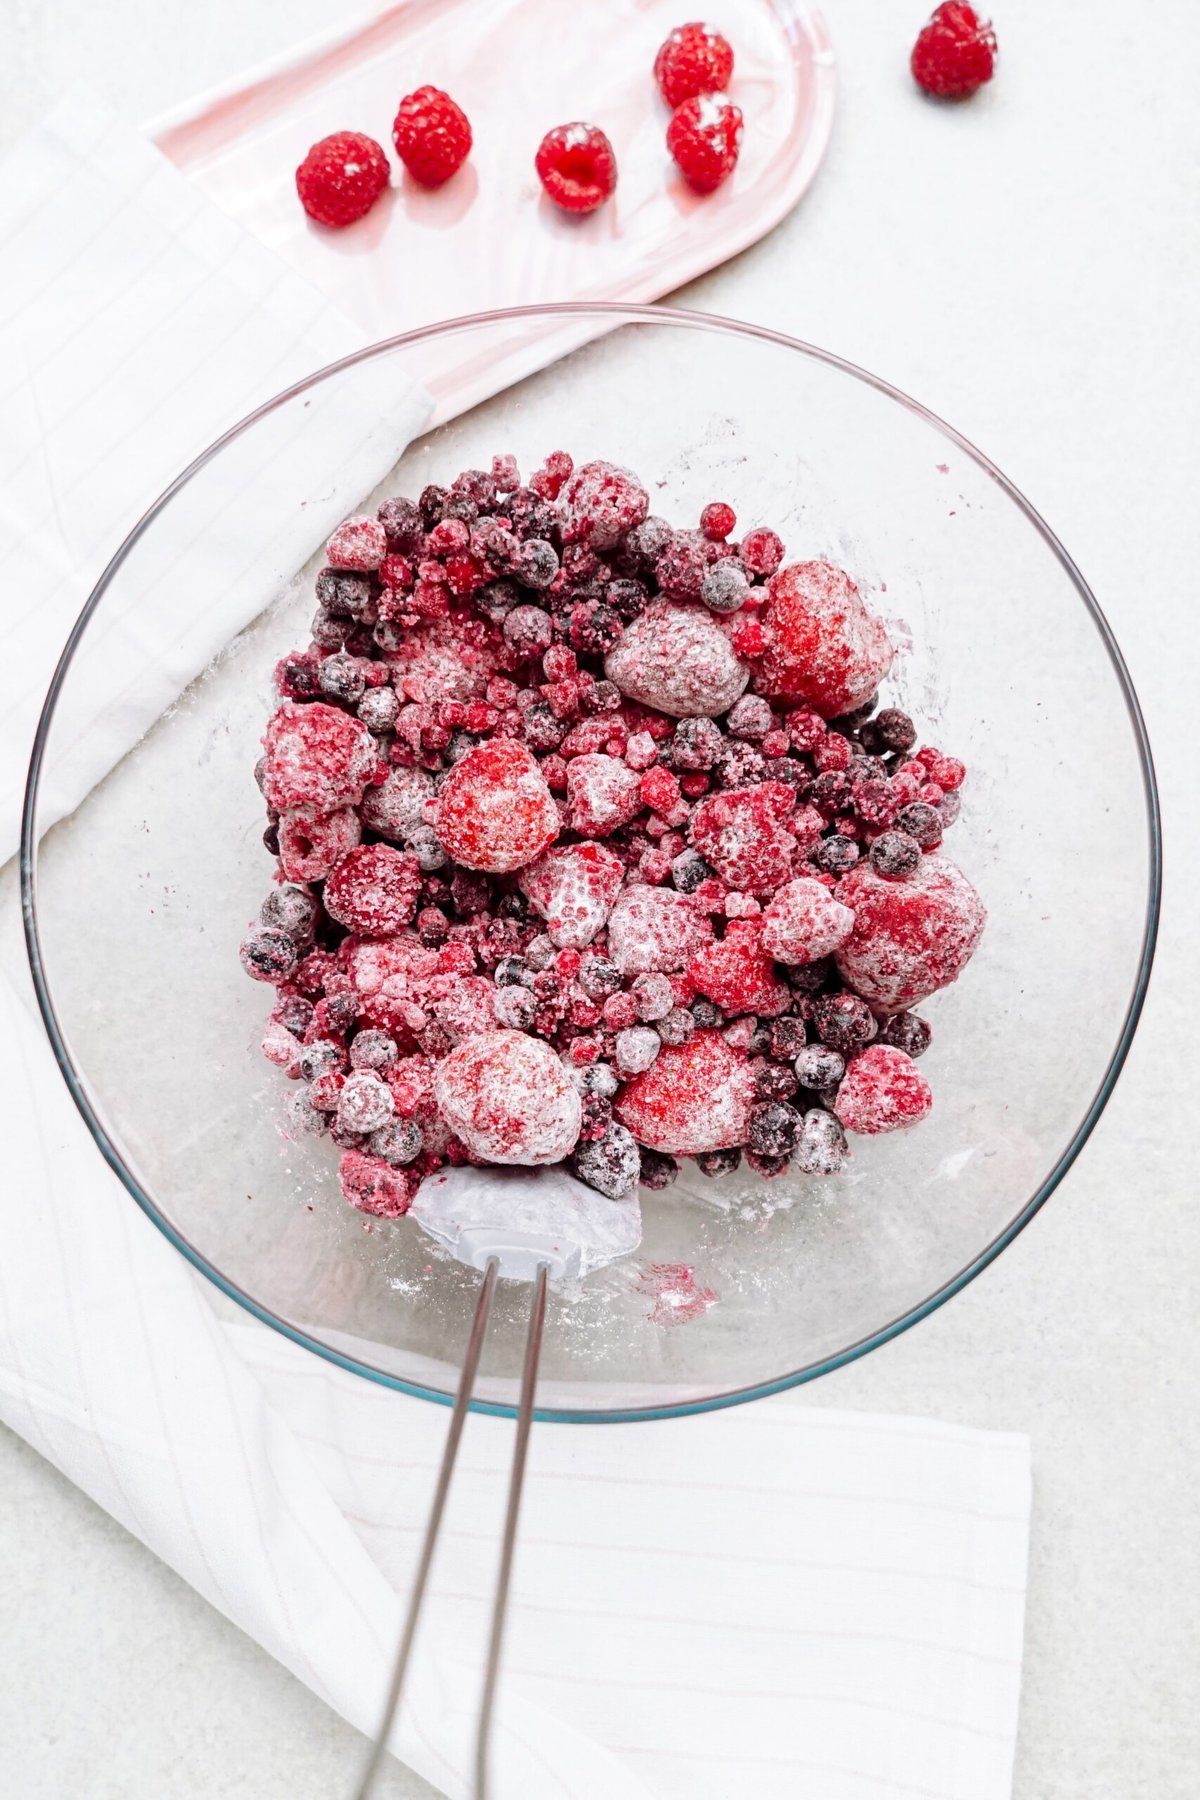 A glass bowl filled with various frozen berries on a white surface, with a few fresh raspberries on a dish in the background.